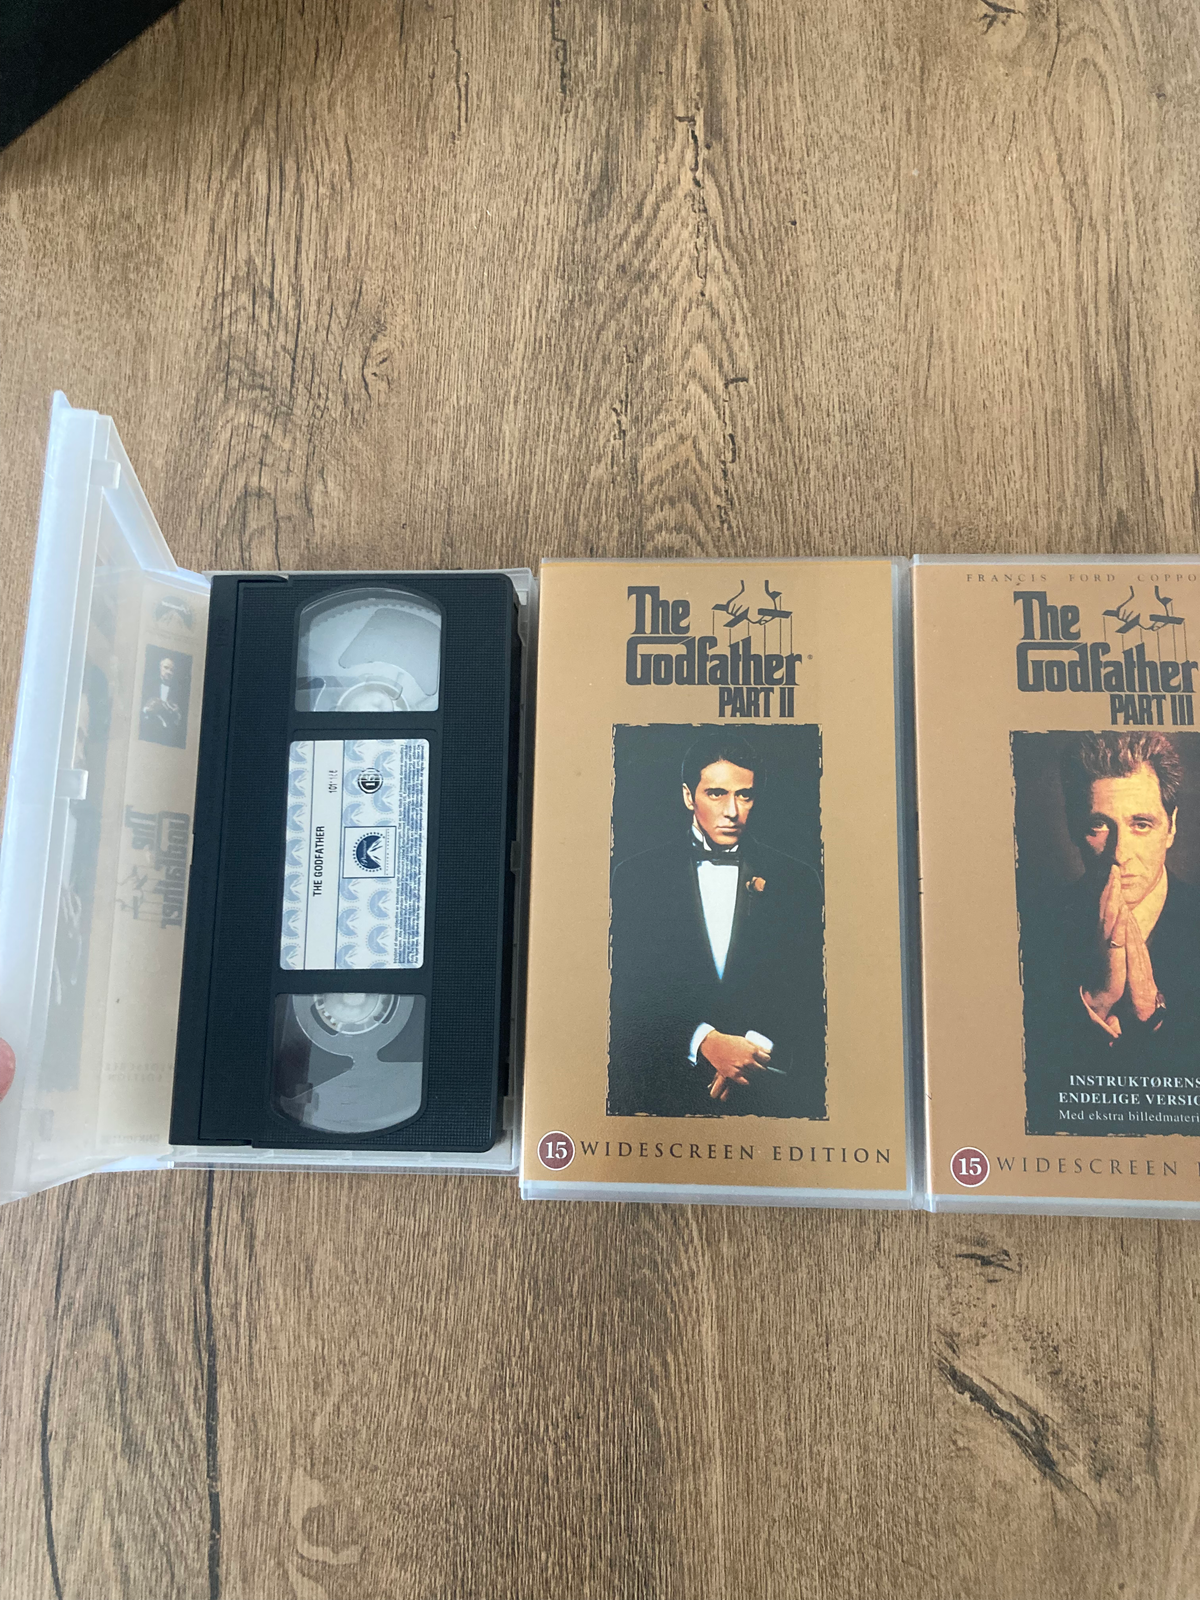 Action, The godfather. Widescreen collection